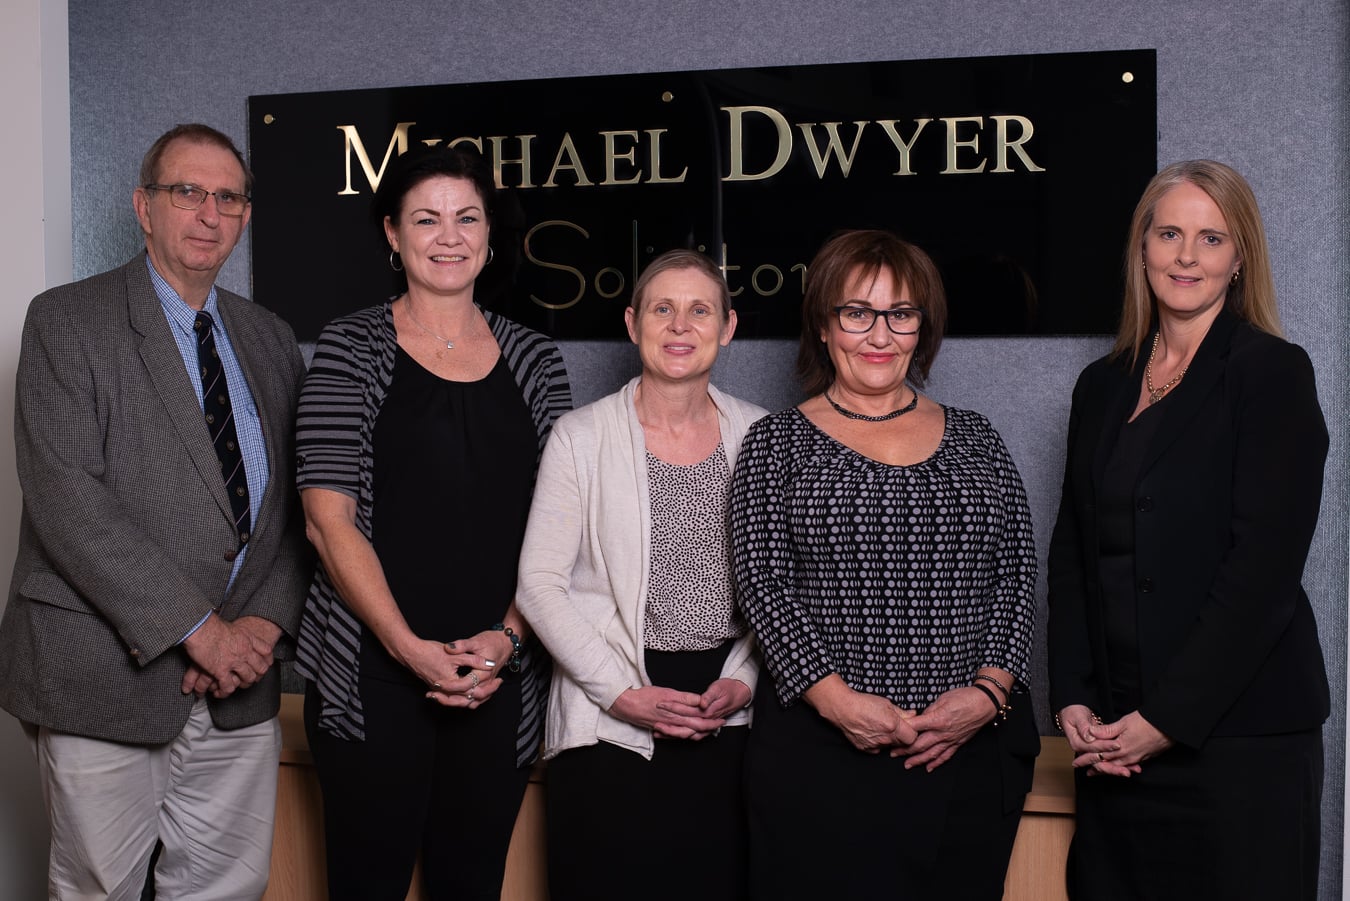 Michael Dwyer Solicitor Team